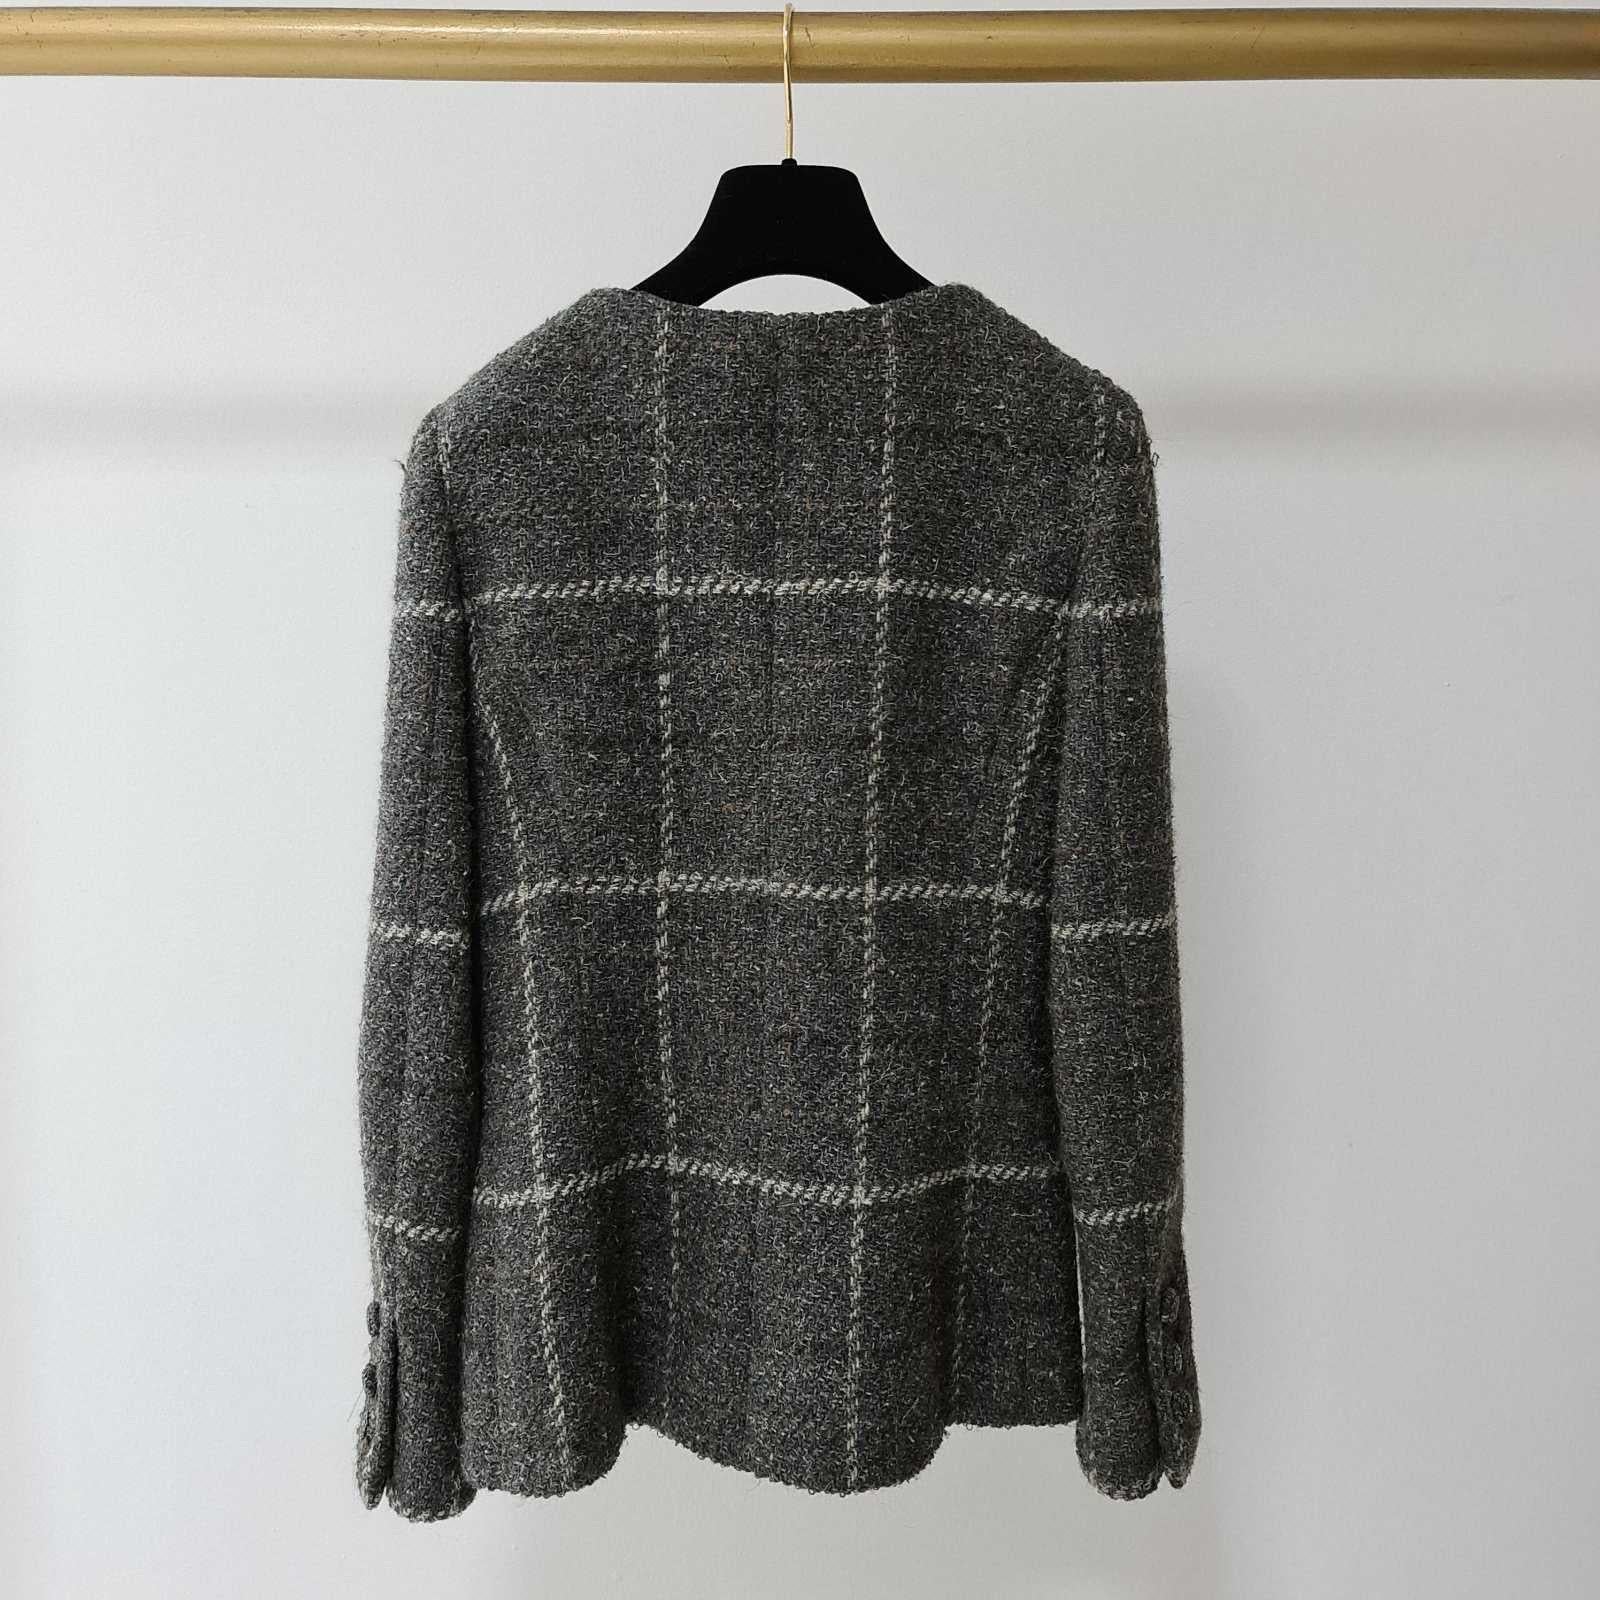 Classic Chanel wool jacket in grey plaid. 
Wear this jacket with smart brown trousers and tan handbag to give your look a chic smart look.
Condition is good.
Sz.36
For buyers from EU we can provide shipping from Poland. Please demand if you need.